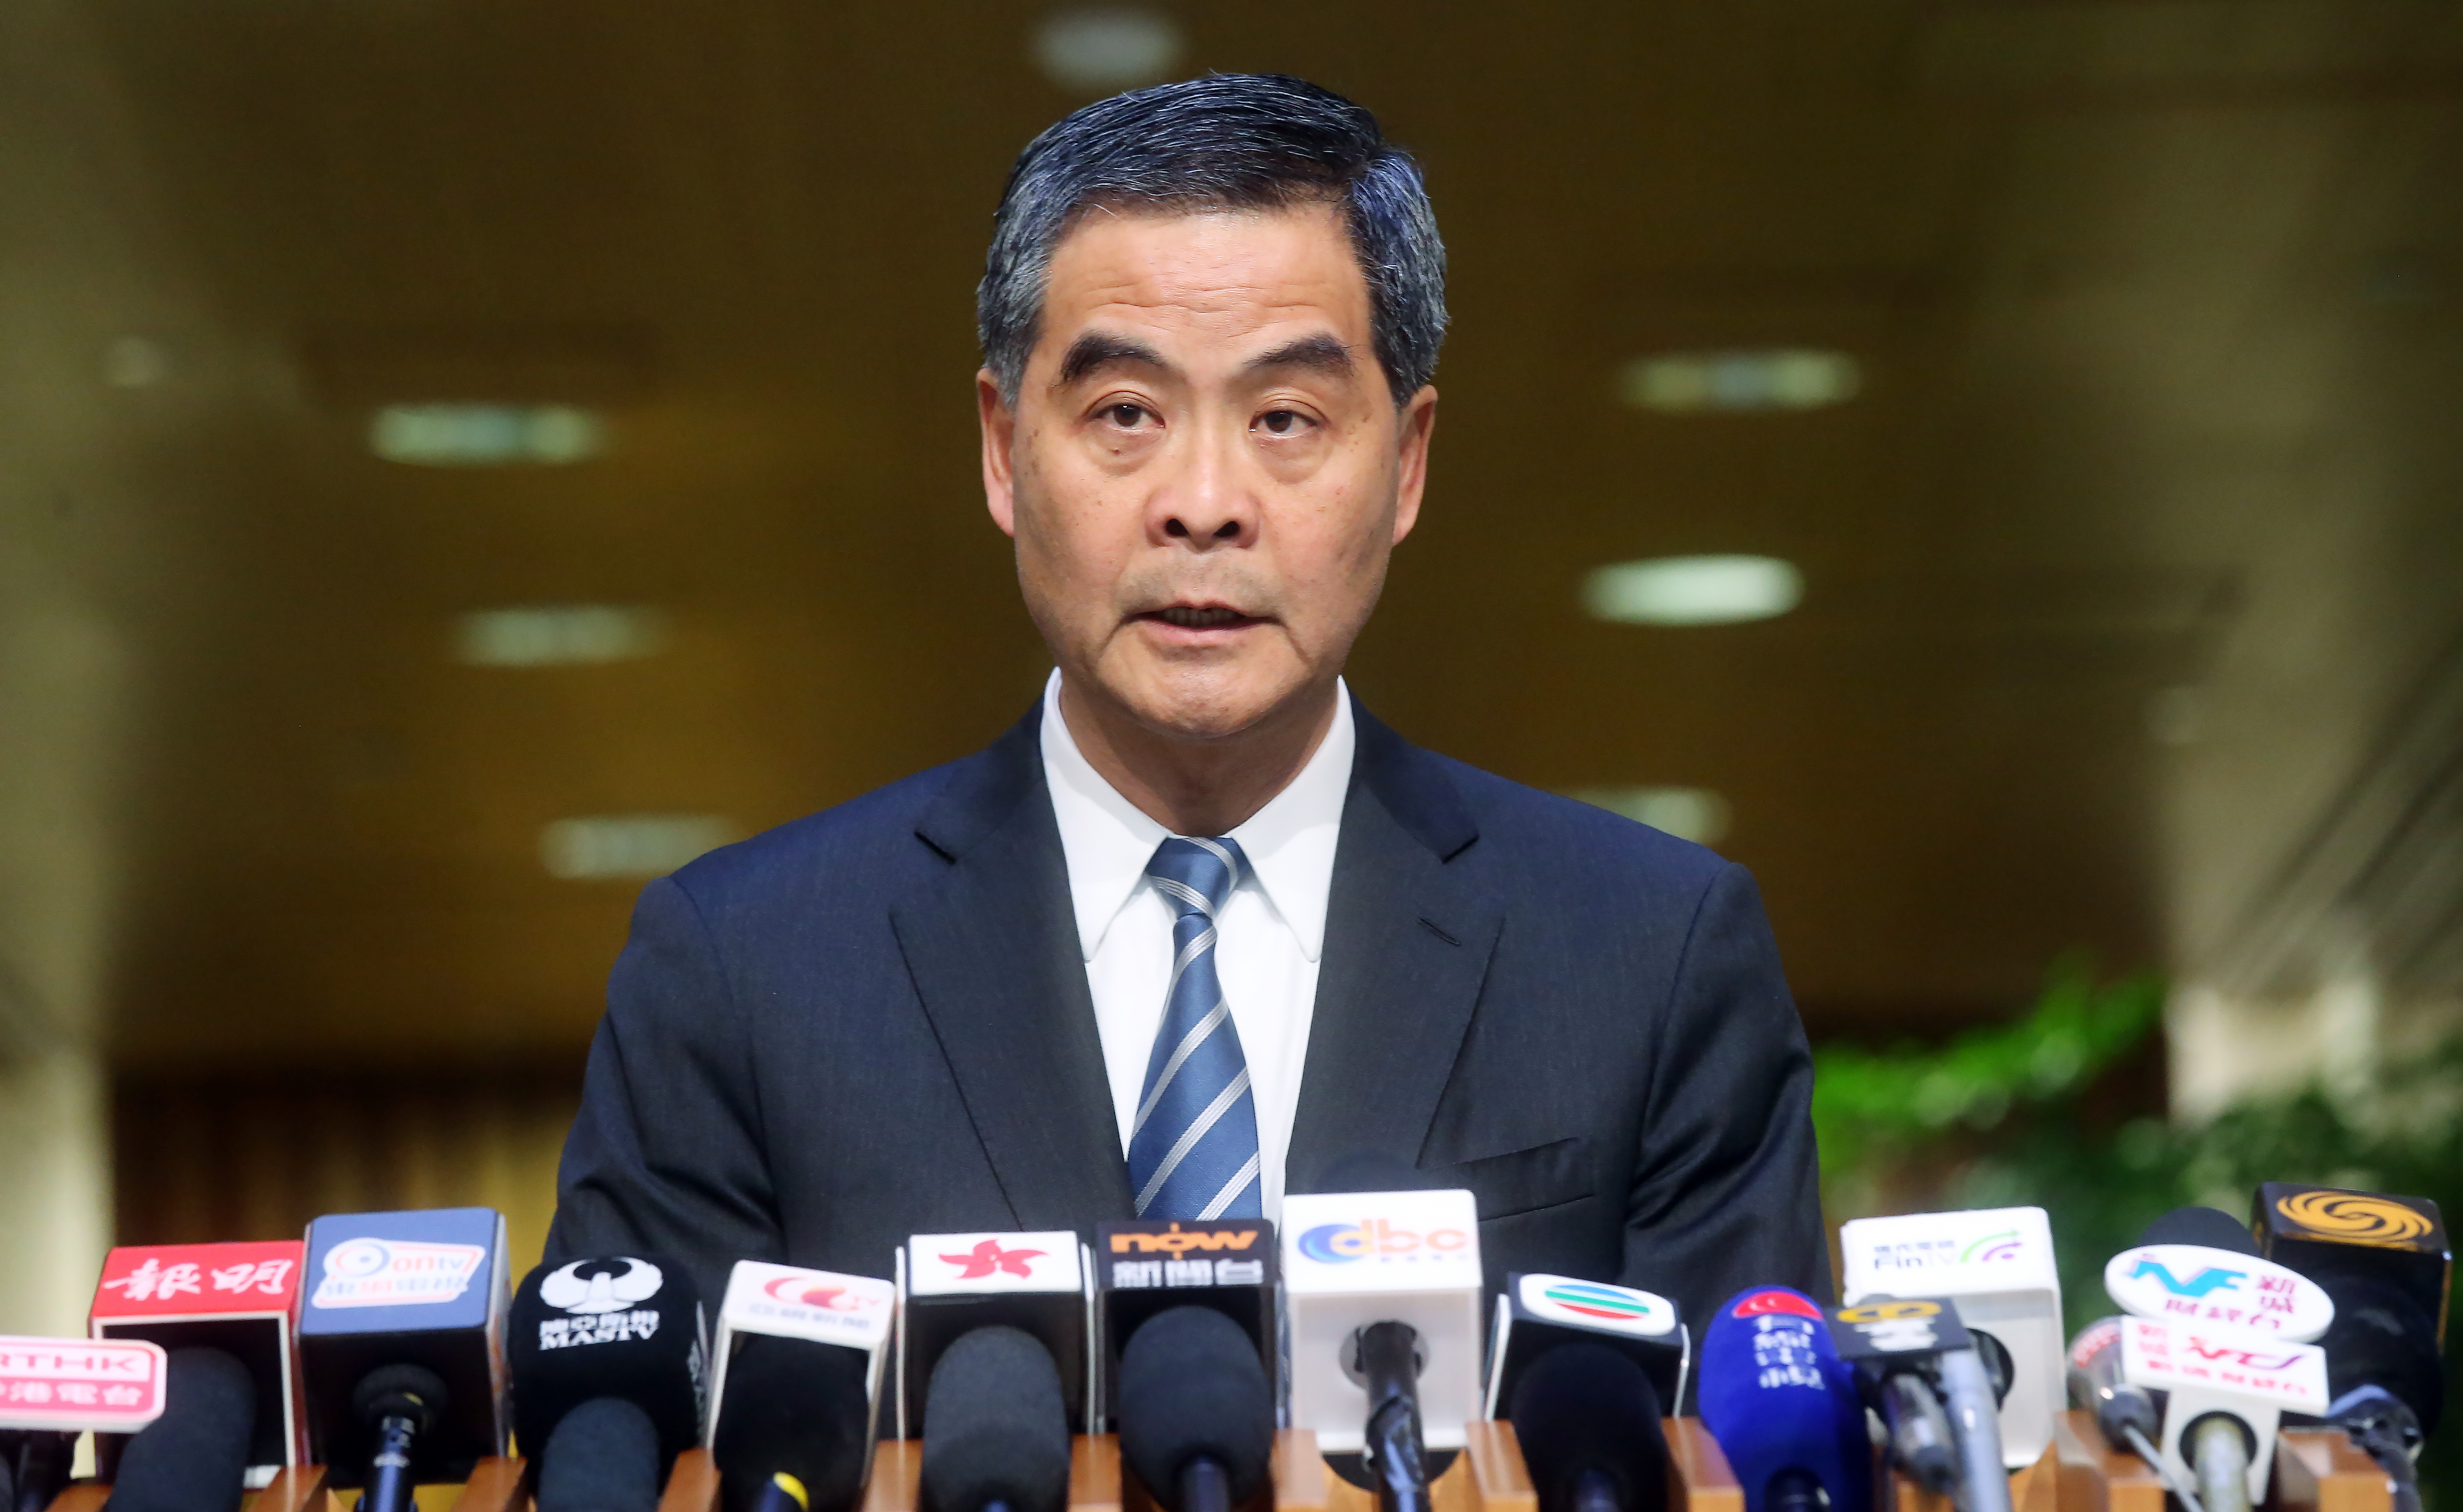 Chief Executive Leung Chun-ying said he 'did not interfere' in the process. The rejection of Professor Johannes Chan, a pro-democracy scholar, is widely seen as having been politically motivated. Photo: Dickson Lee